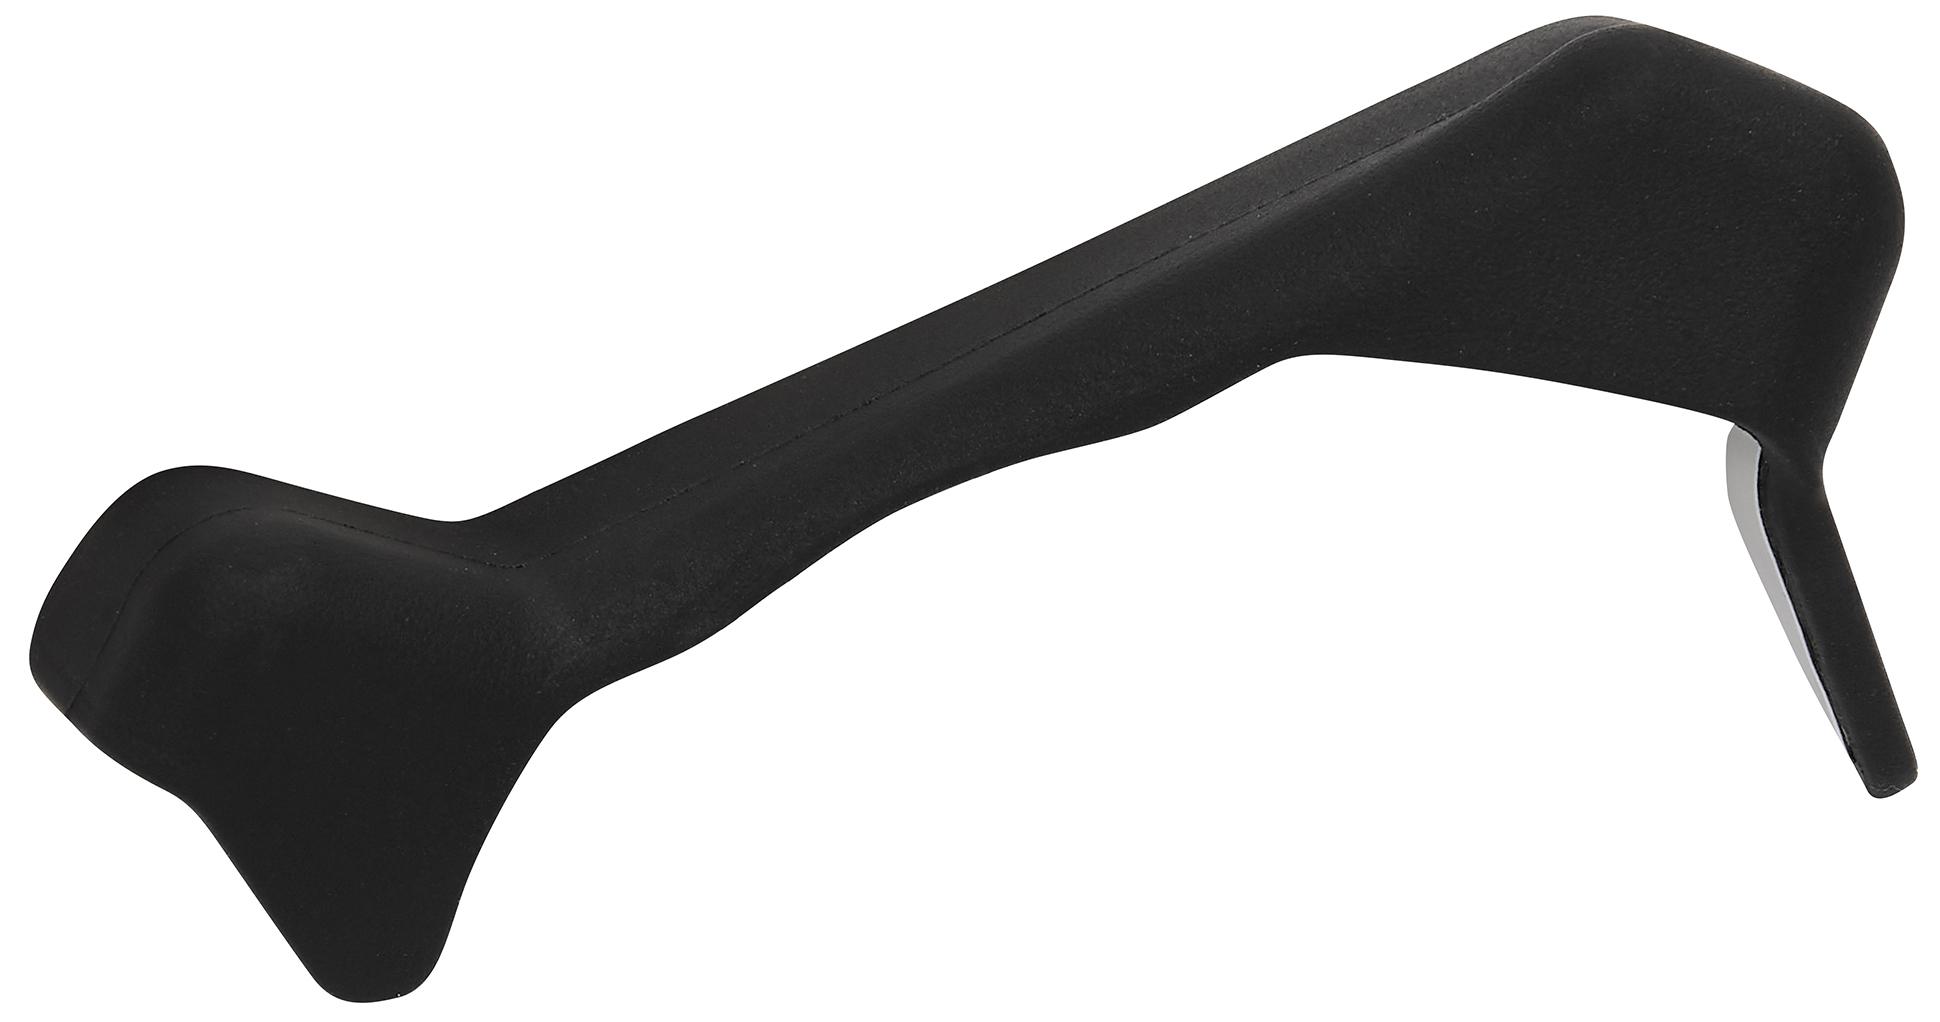 Nukeproof Dissent Carbon Iscg Protector  Black